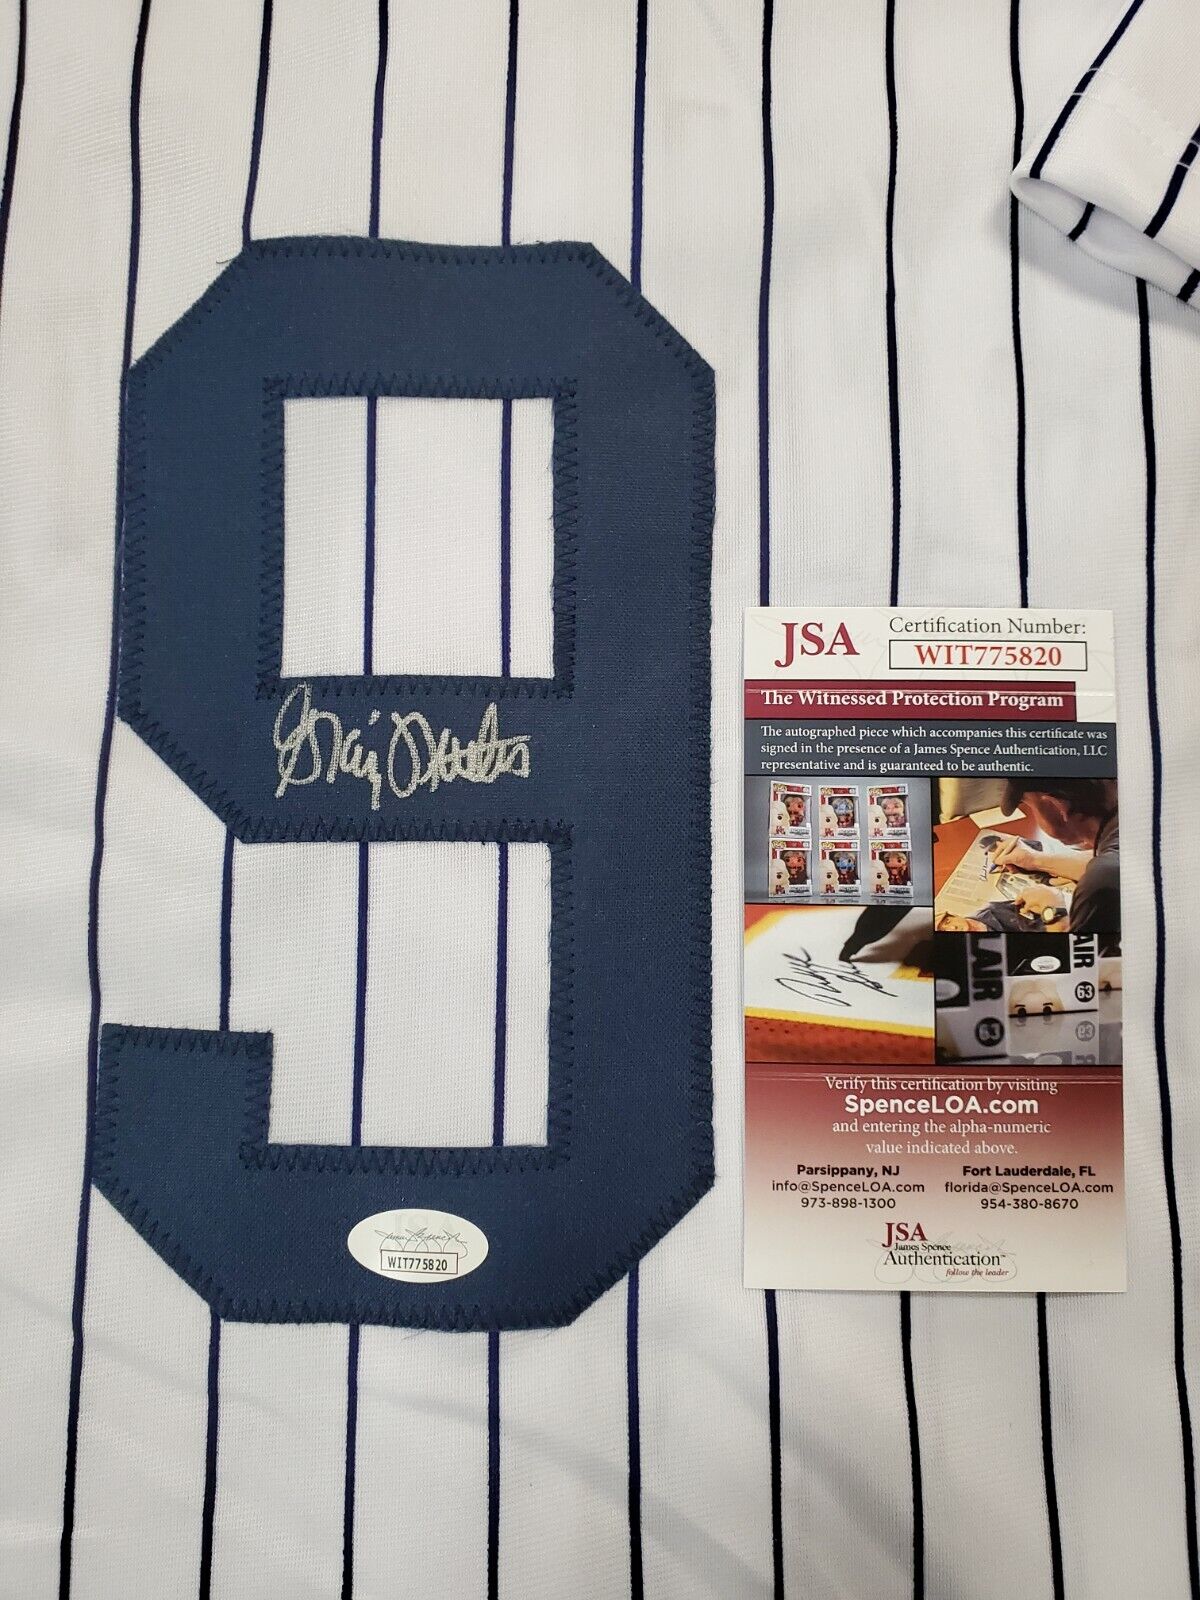 MVP Authentics N.Y. Yankees Style Graig Nettles Autographed Signed Custom Jersey Jsa Coa 99 sports jersey framing , jersey framing